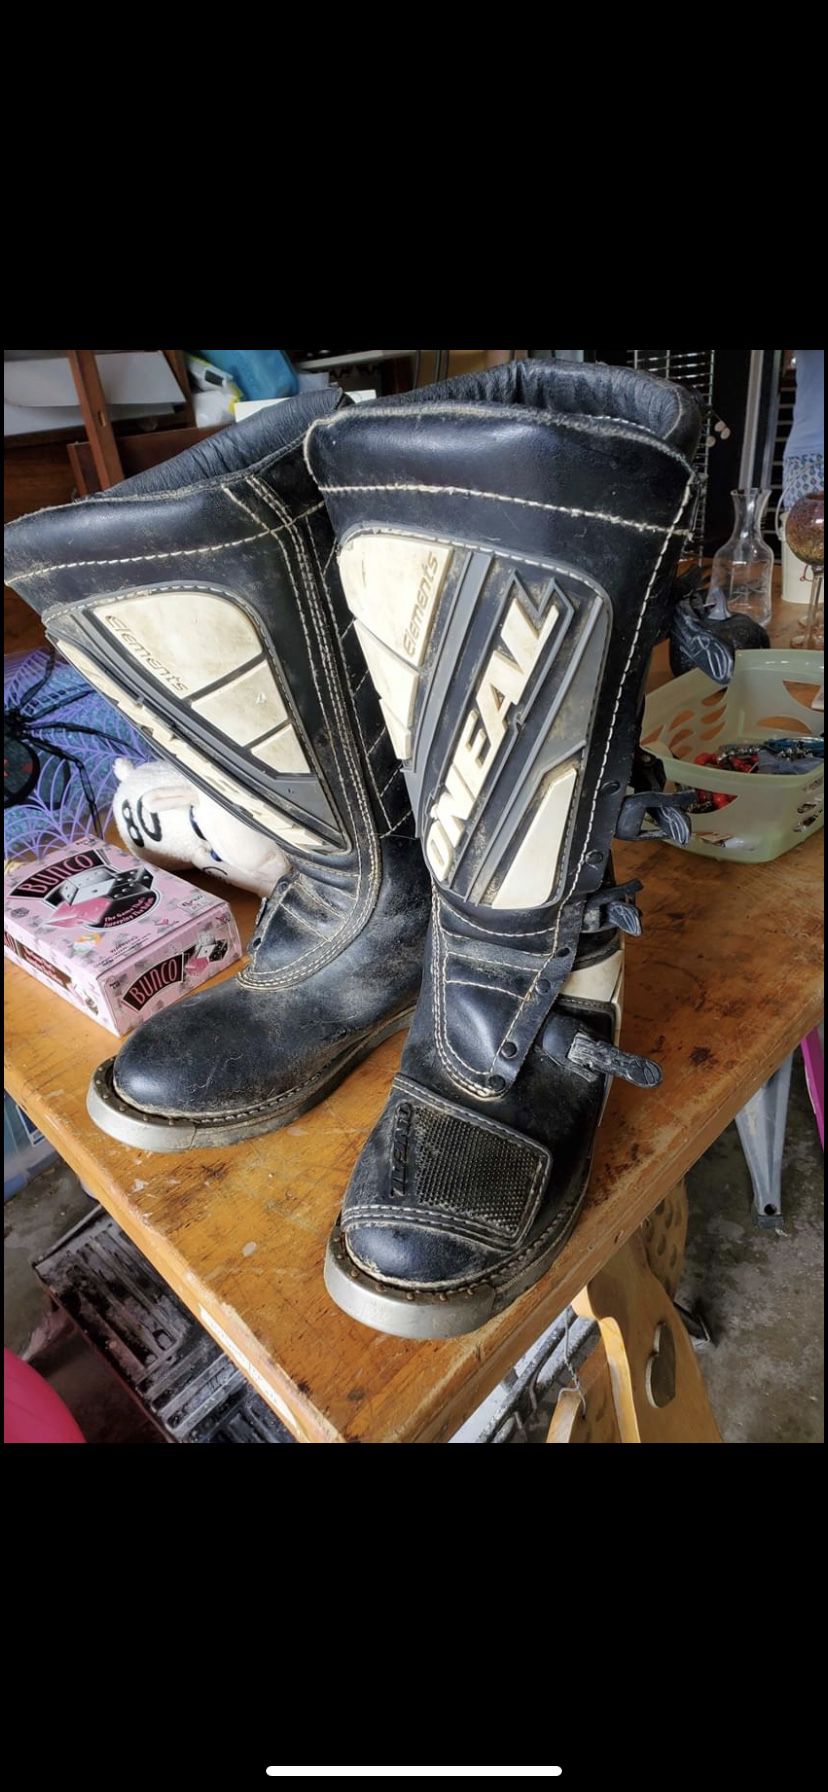 Riding boots size 10